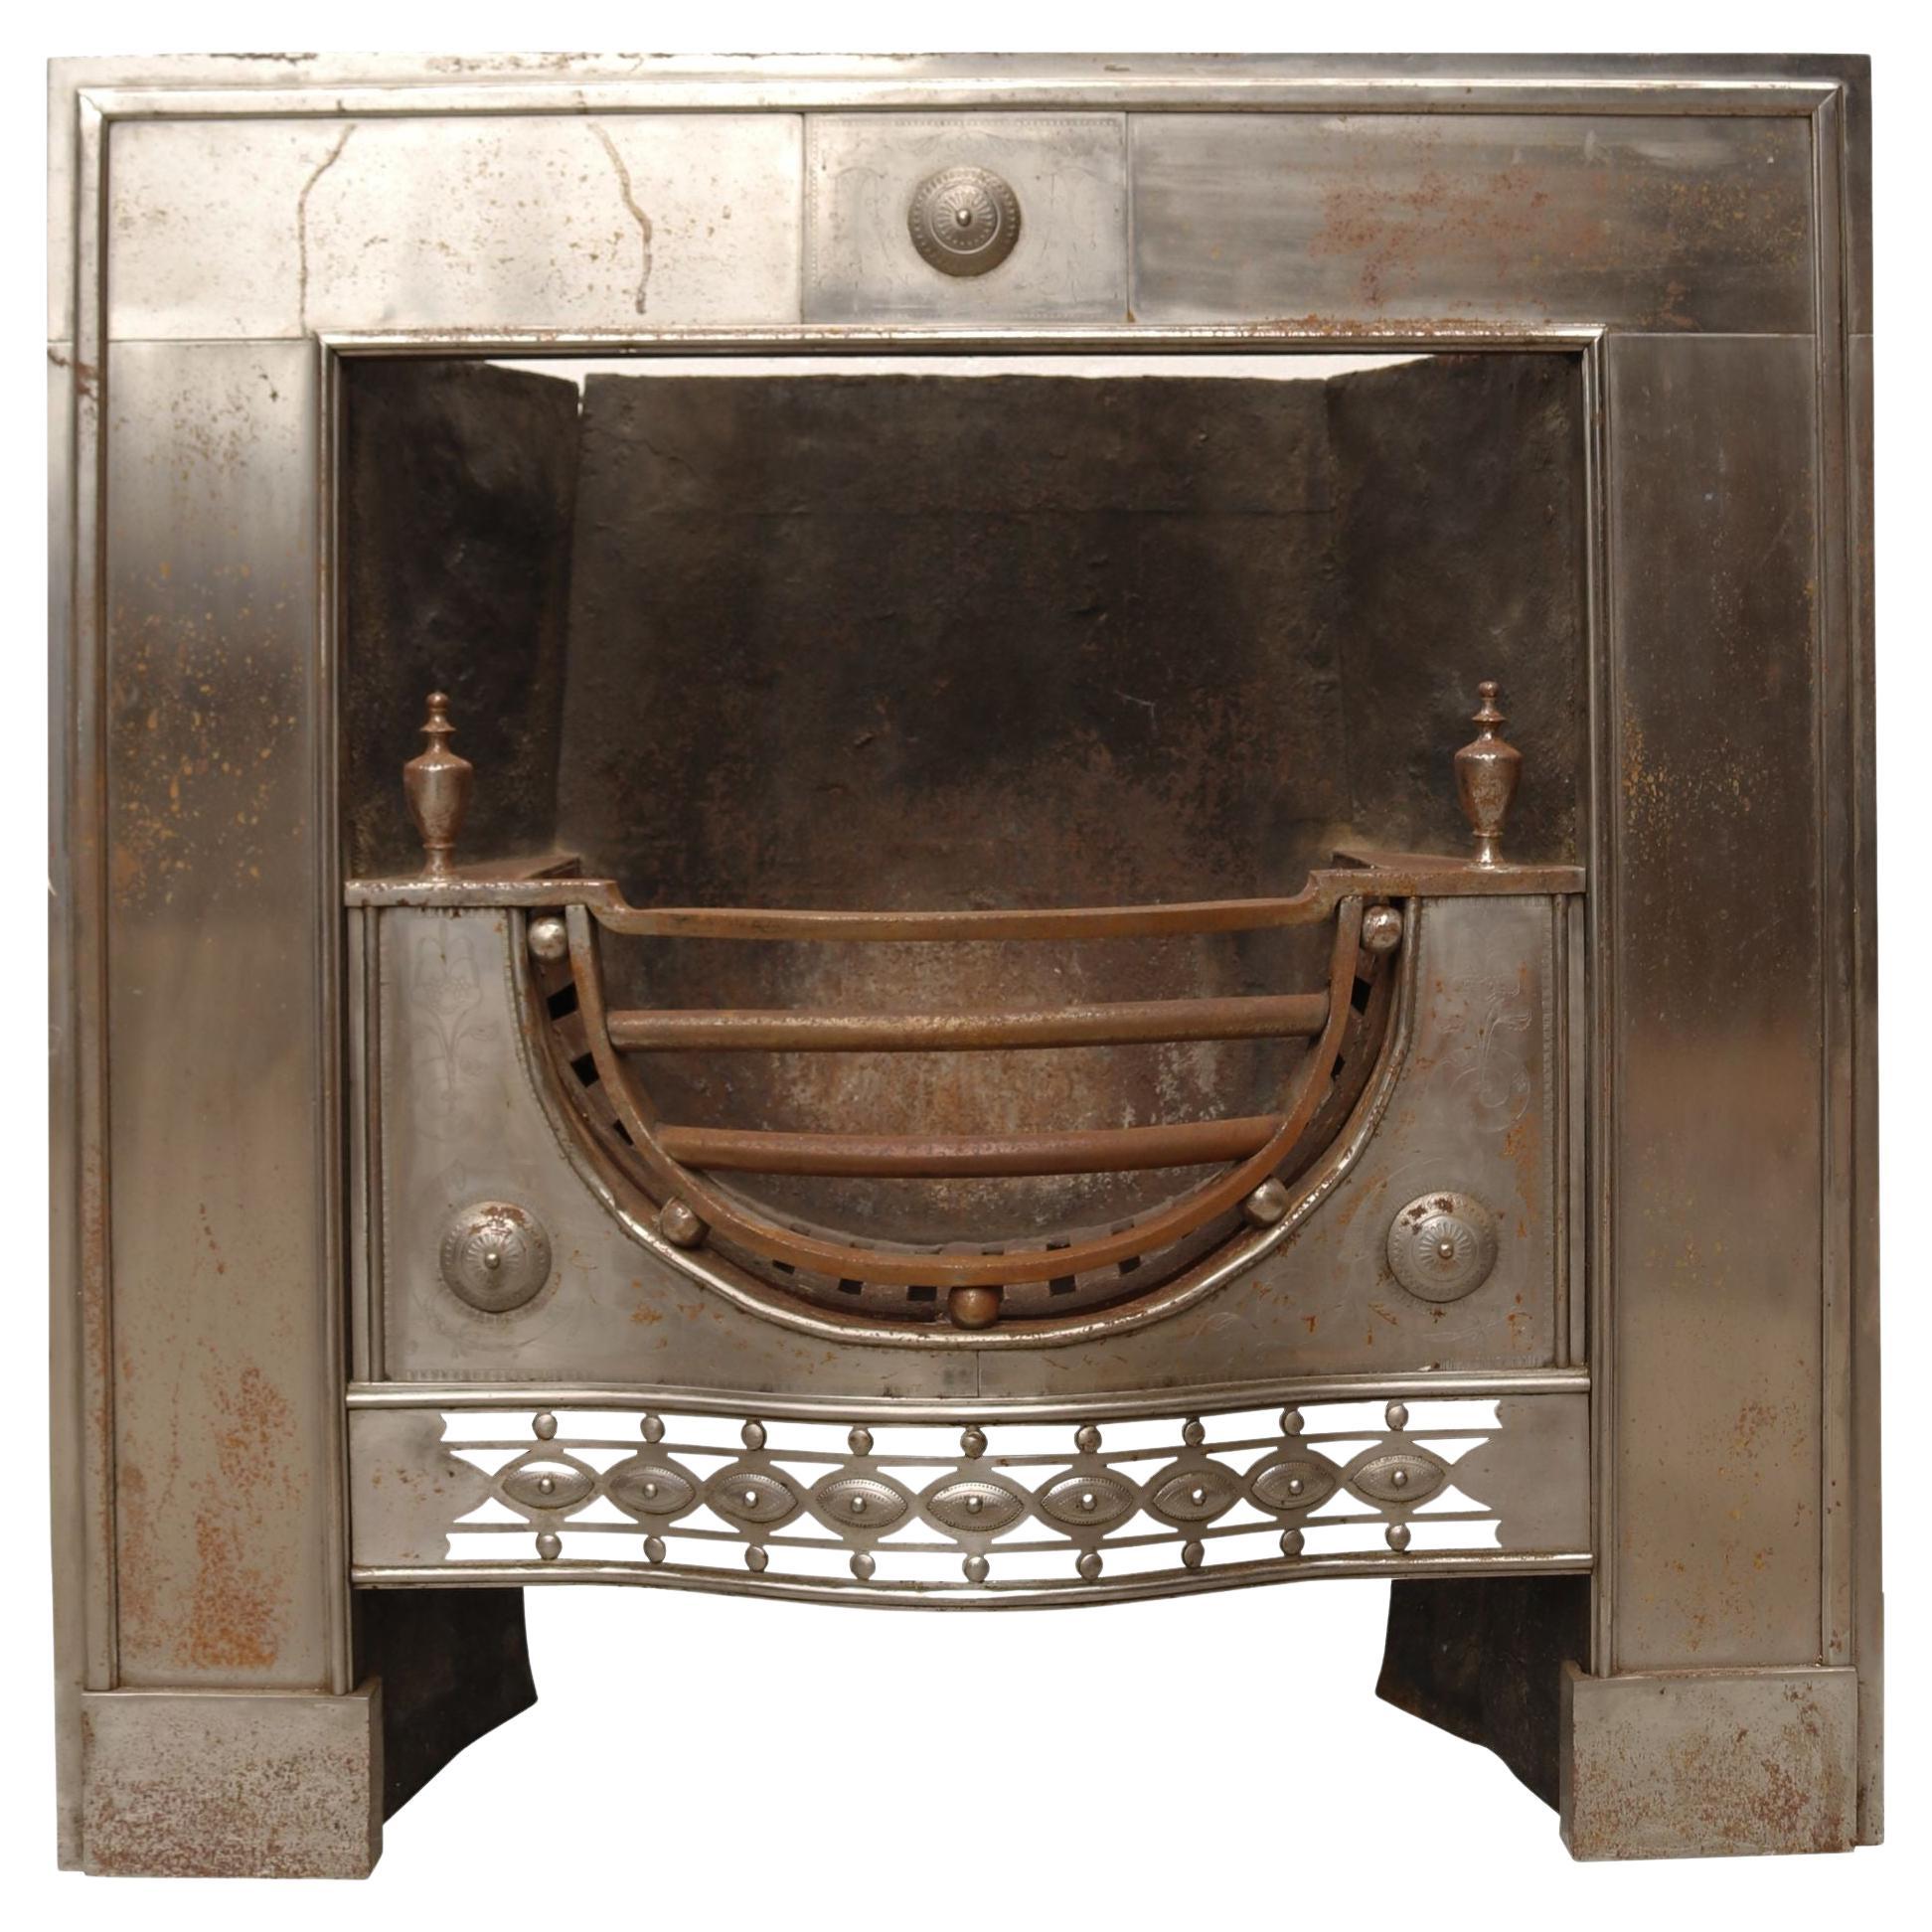 English 18th Century Style Register Fire Grate